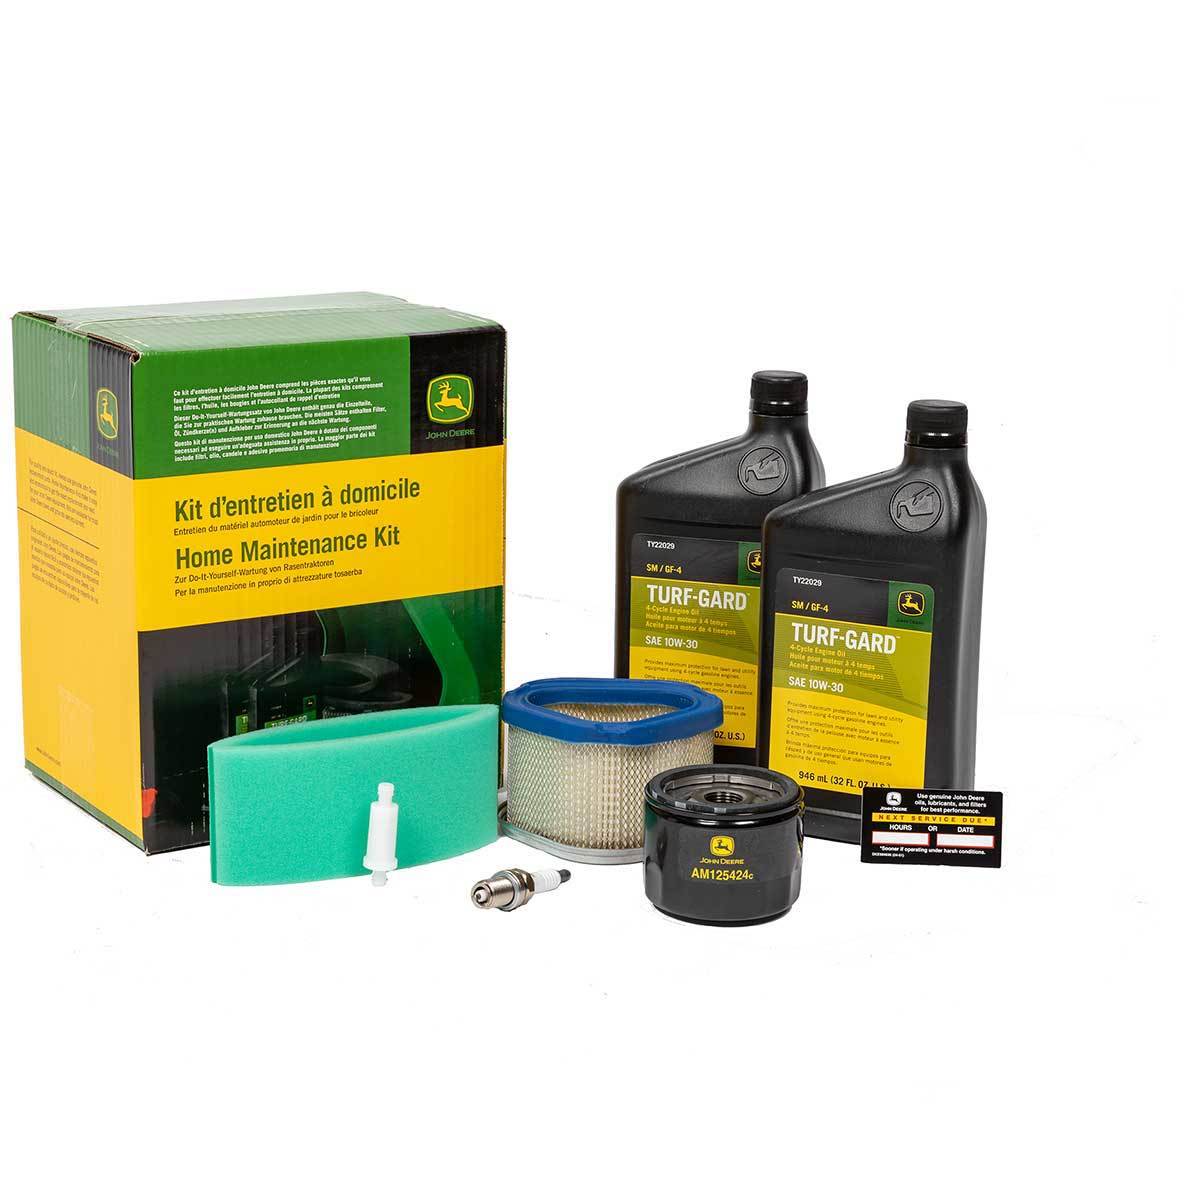 Home Maintenance Kit for 100, 200, GT, LX and F500 Series